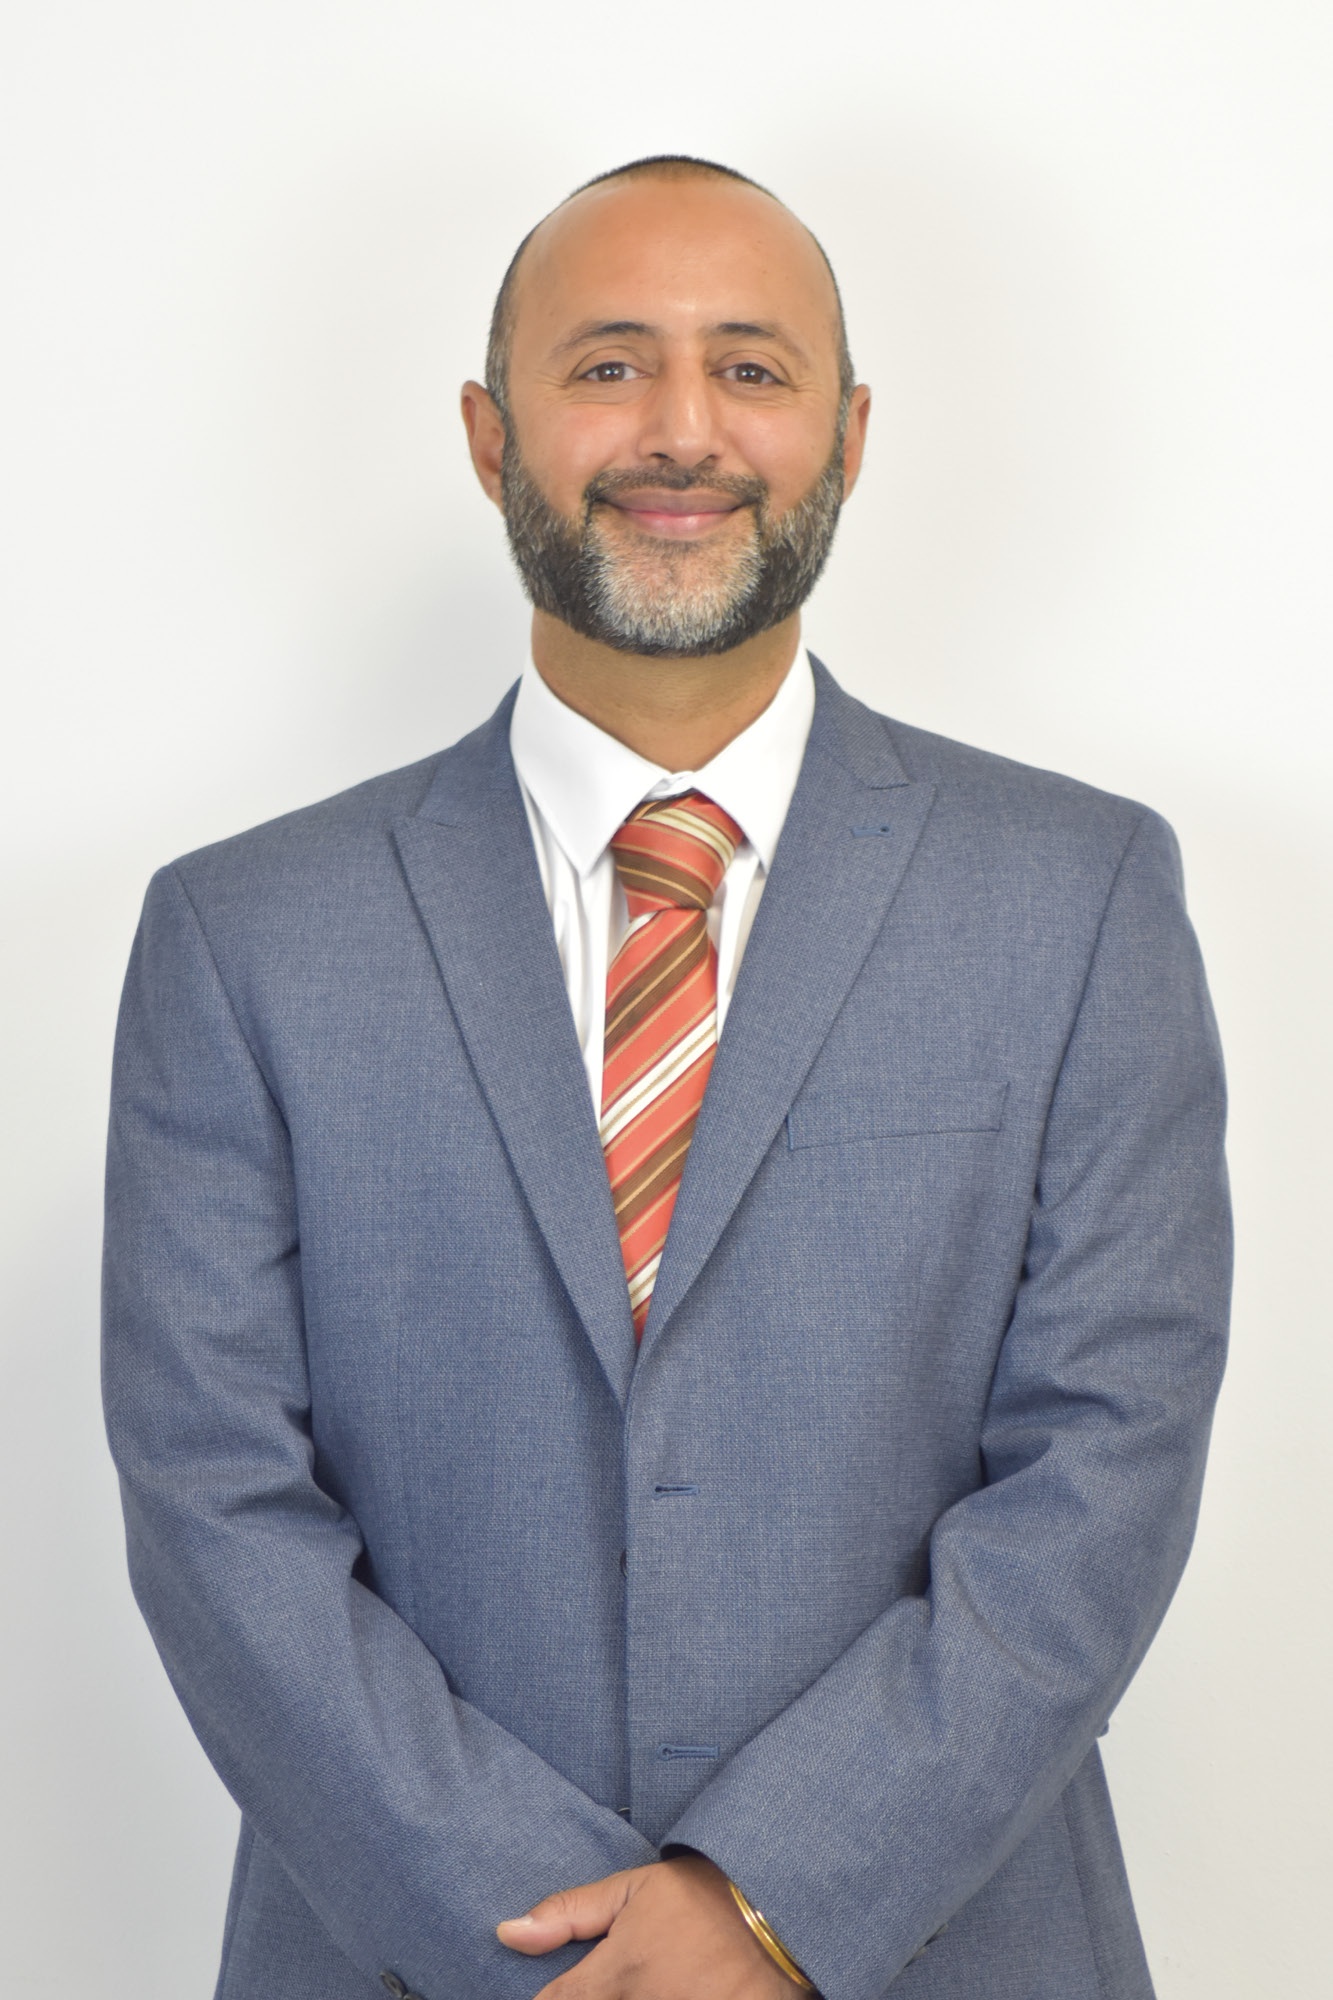 Mr Johal, the Head of School, smiles at the camera.